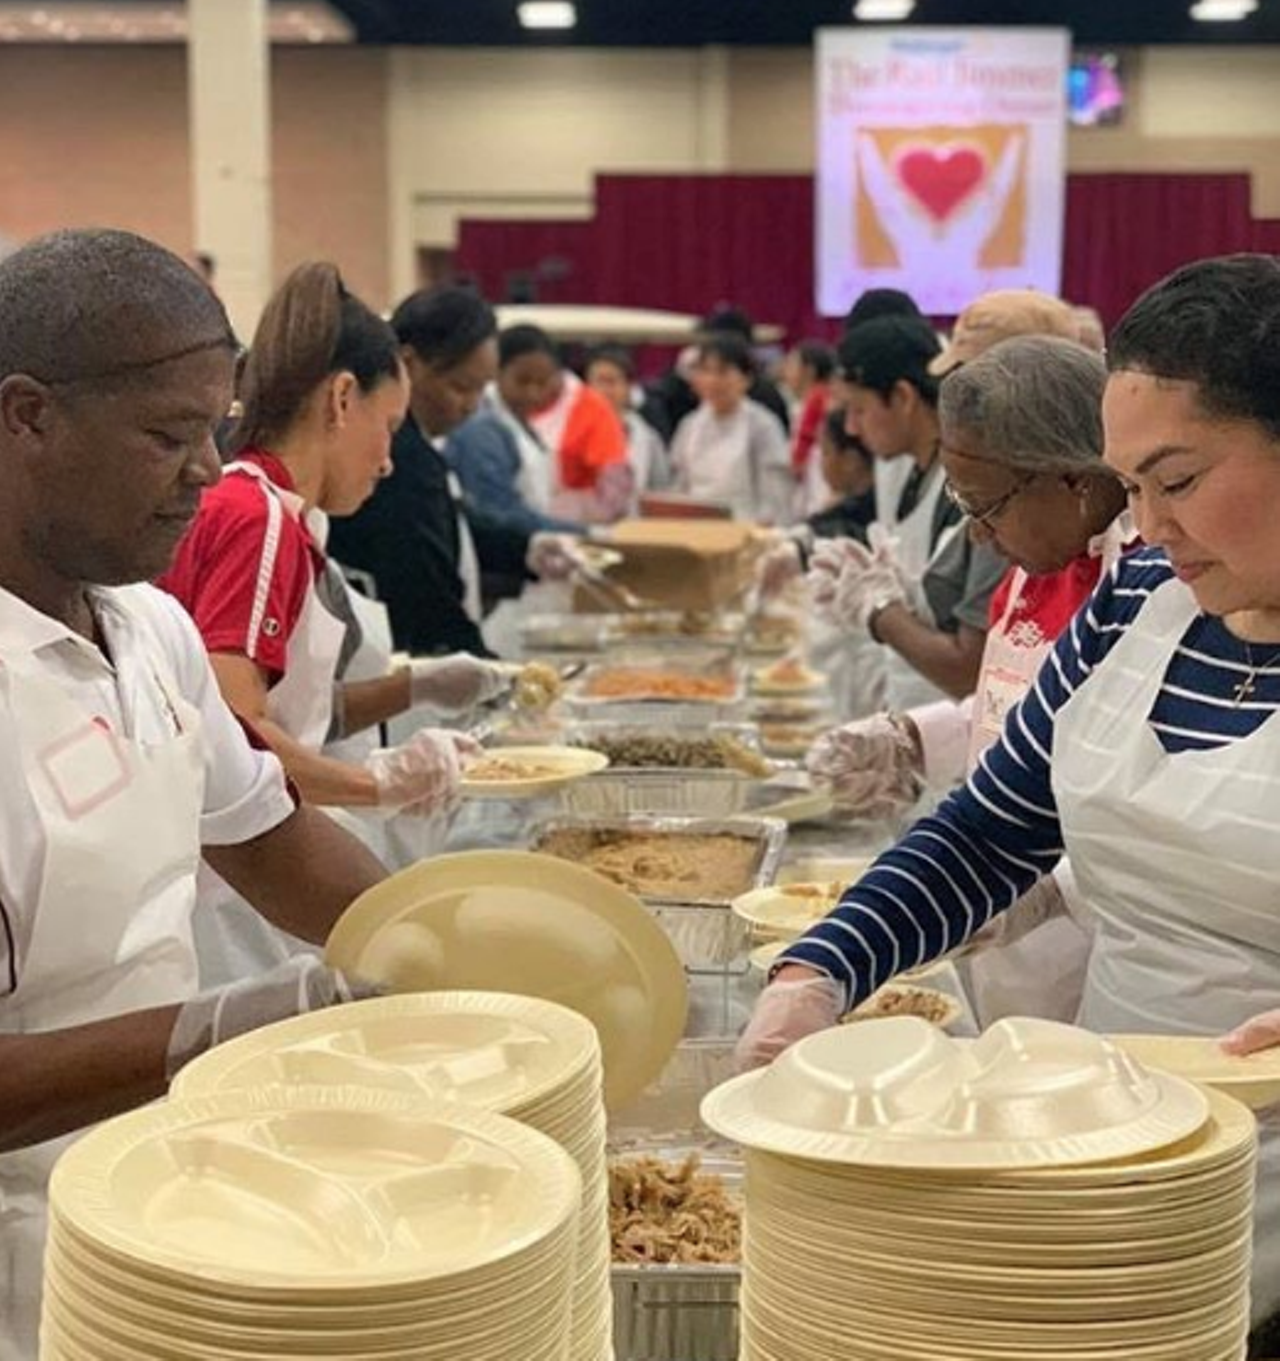 Volunteer at the Raul Jimenez Thanksgiving Dinner
900 E Market St, (210) 525-1007, rauljimenezdinner.com
In 1979, Raul Jimenez started a tradition that has touched so many San Antonians, especially those who would not have a Thanksgiving meal otherwise. If you and bae are wanting to do some good, spend some time helping out at the annual community event. Not only will it make you feel warm and fuzzy inside, but you’ll be able to make a new tradition with your sweetheart. Aww!
Photo via Instagram / jimenezdinner